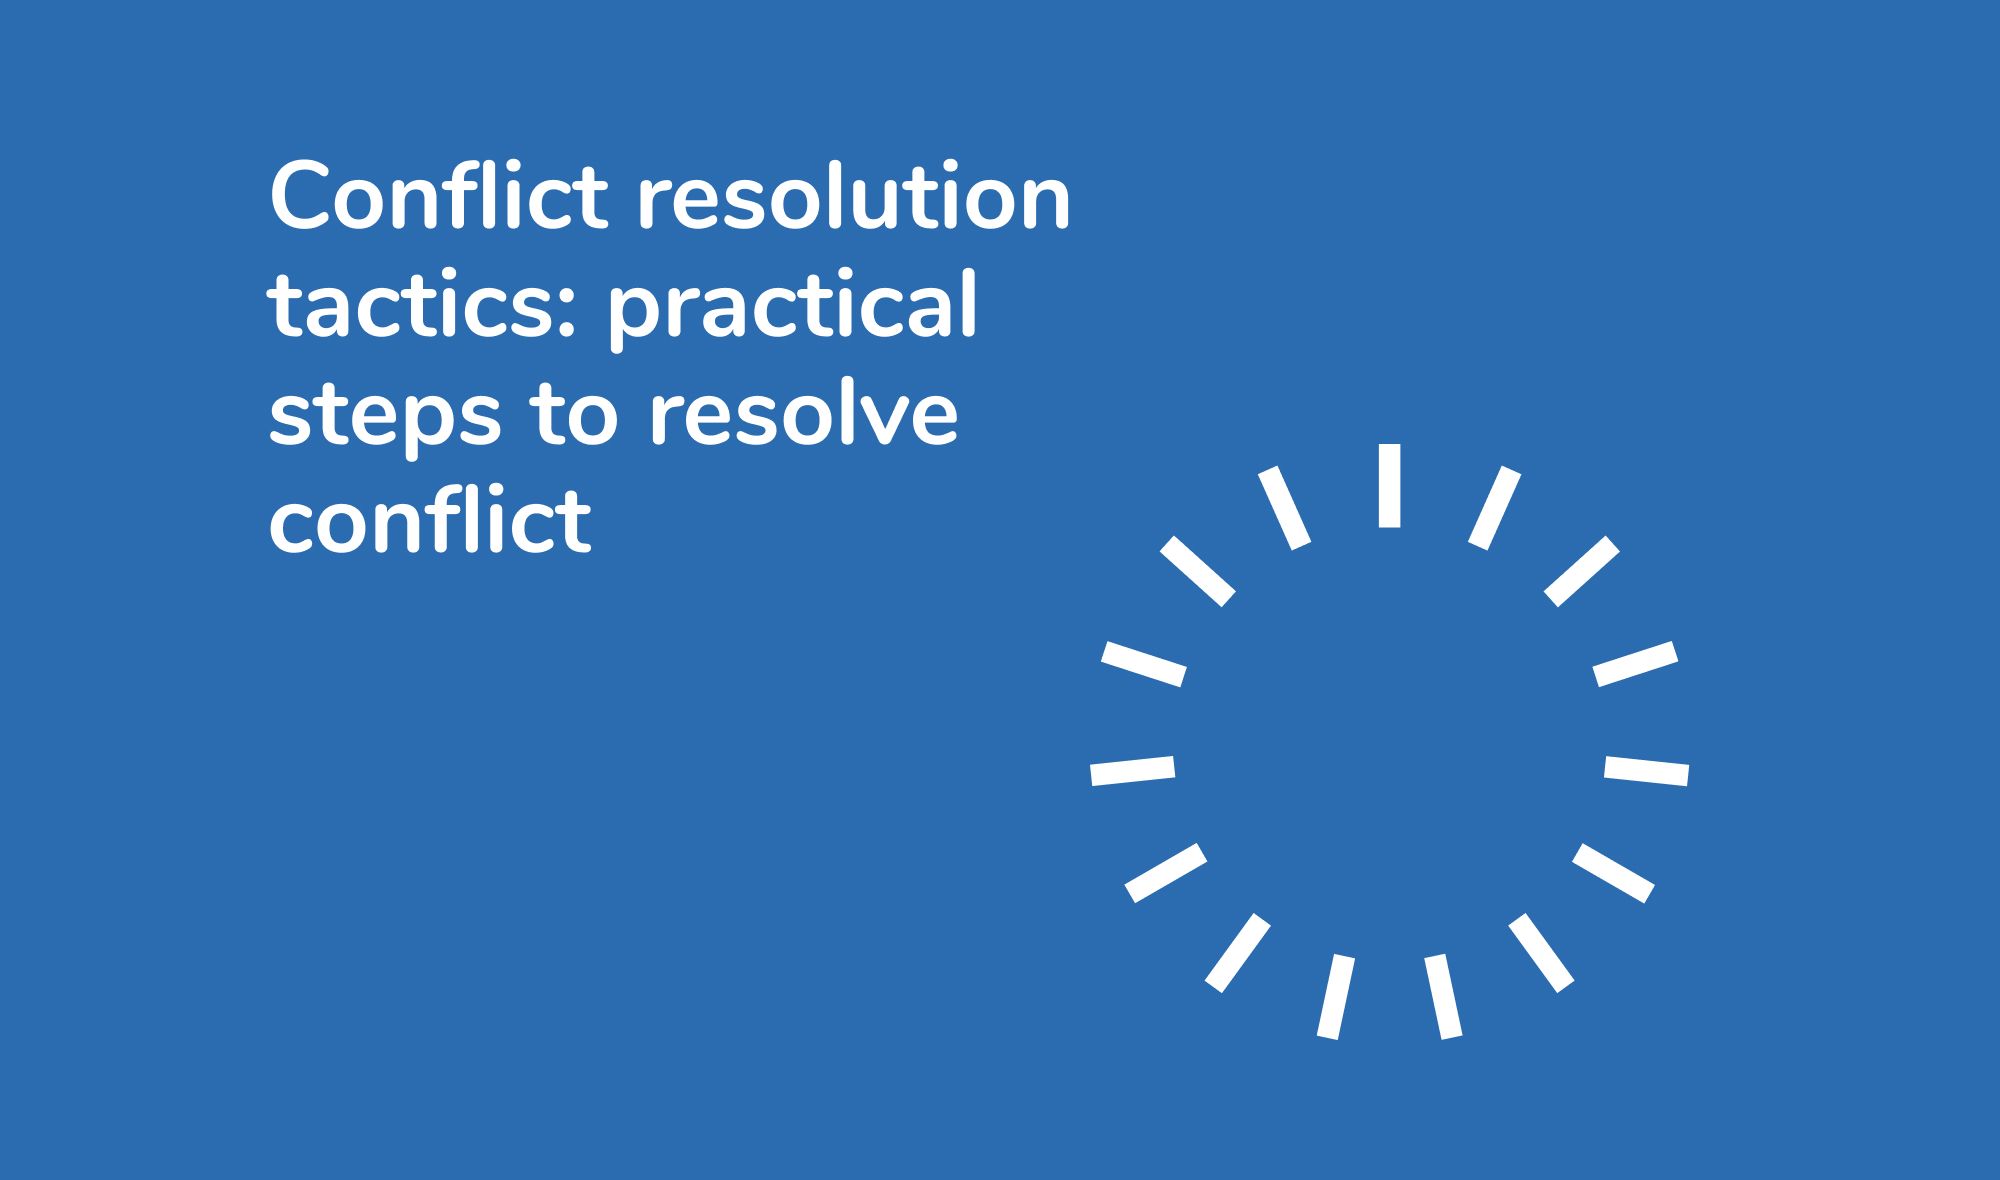 Conflict resolution tactics: practical steps to resolve conflict